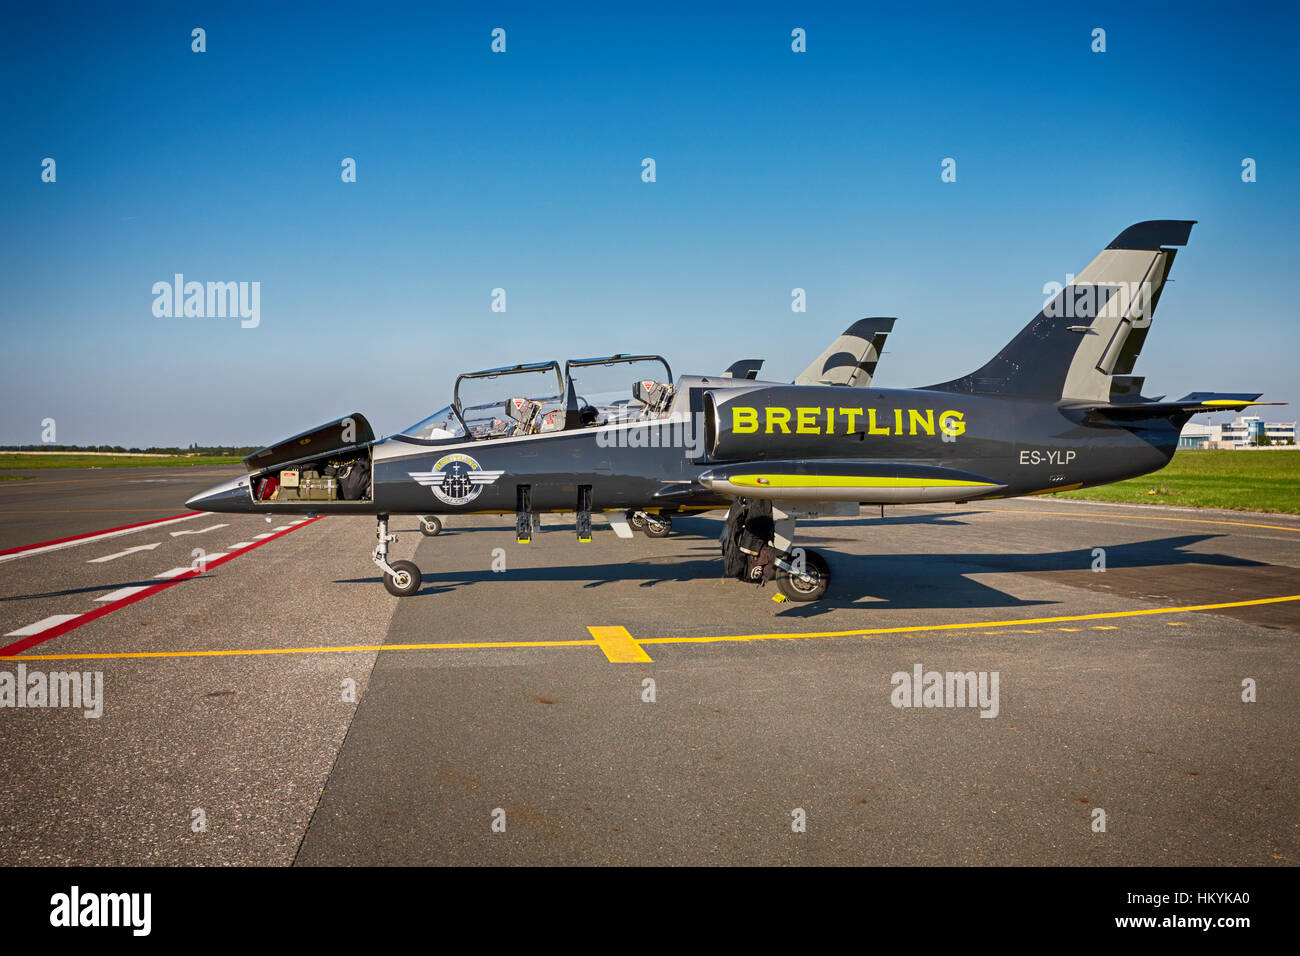 PRAGUE - SEPTEMBER 6: Airplanes Aero L-39 Albatros from Breitling Jet Team on parking stand in Vaclav Havel Prague Airport on September 6, 2013. The B Stock Photo